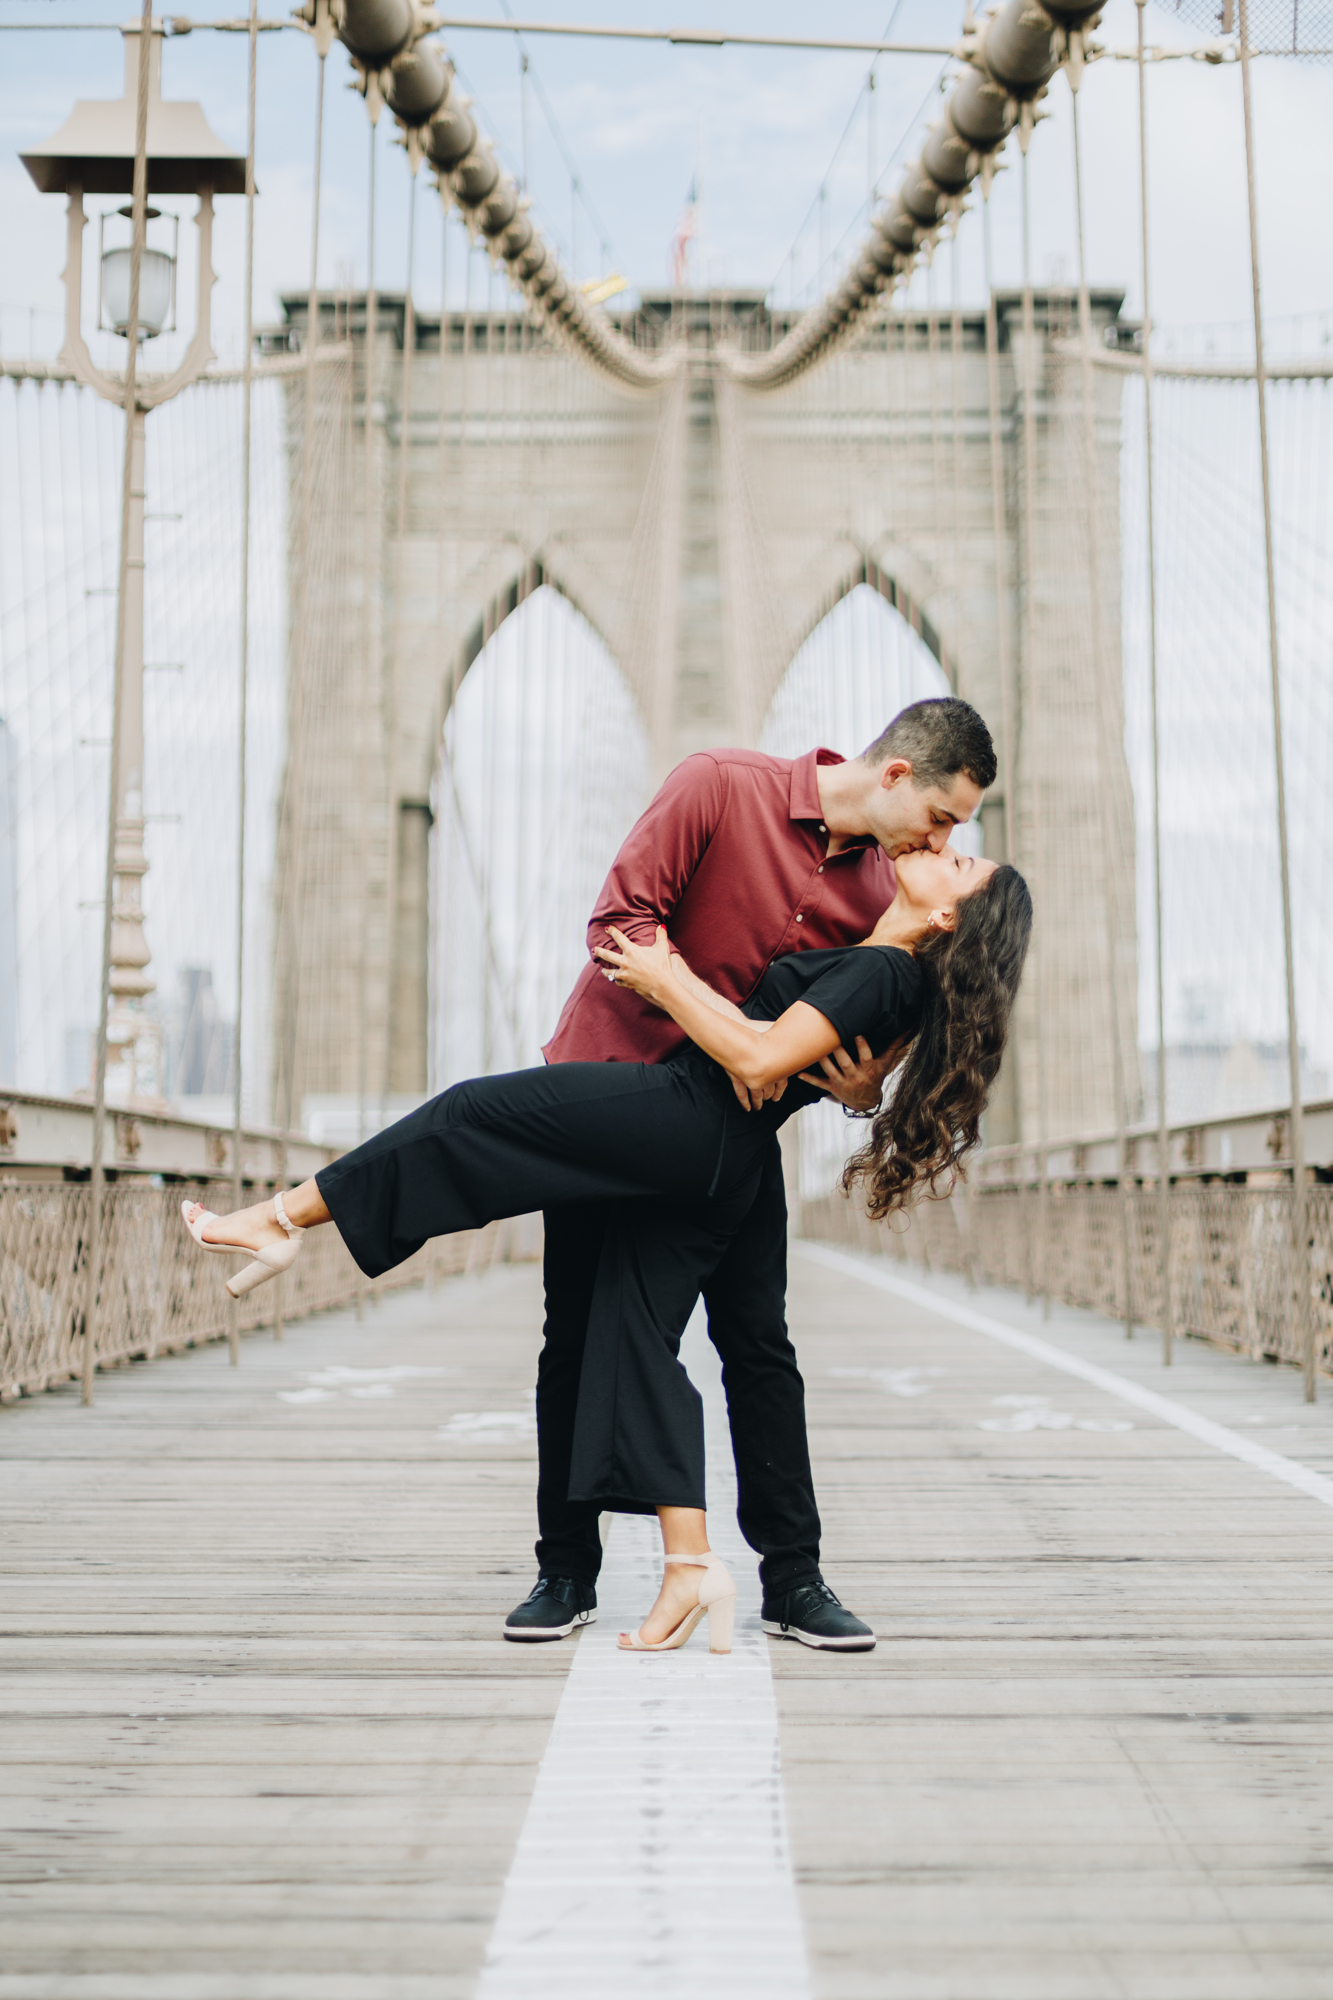 New York Engagement Photo Sessions in NYC